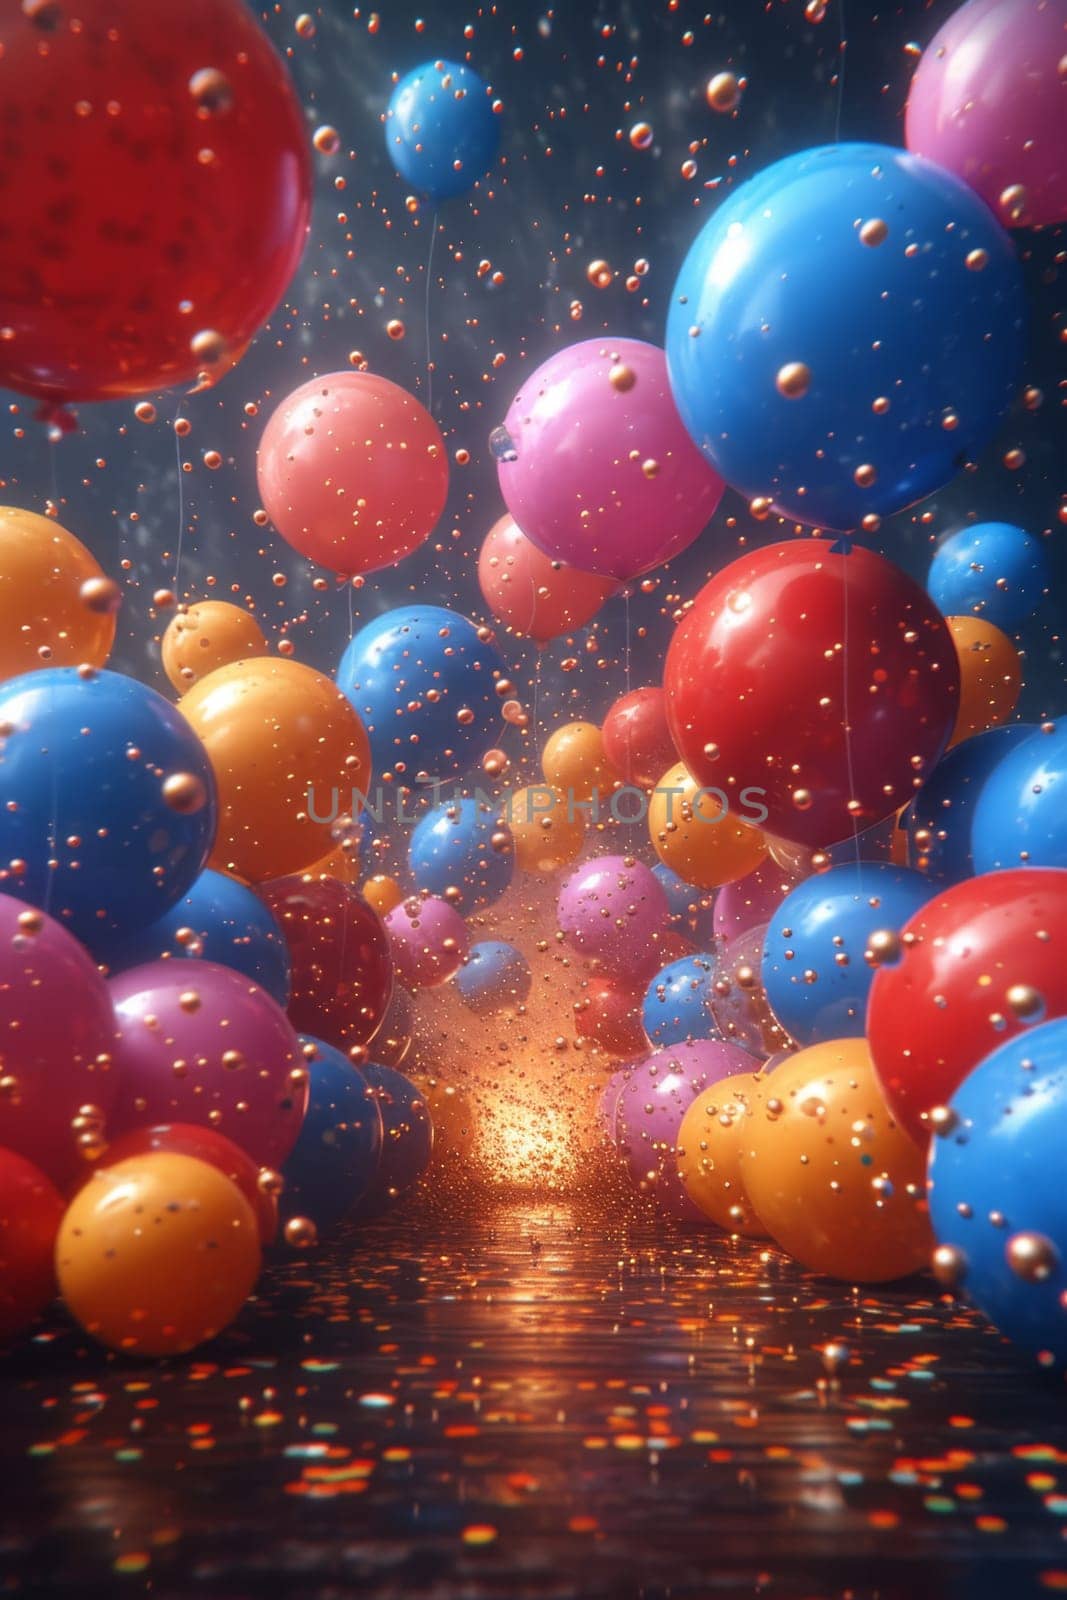 Lots of festive colorful balloons on a blue background.